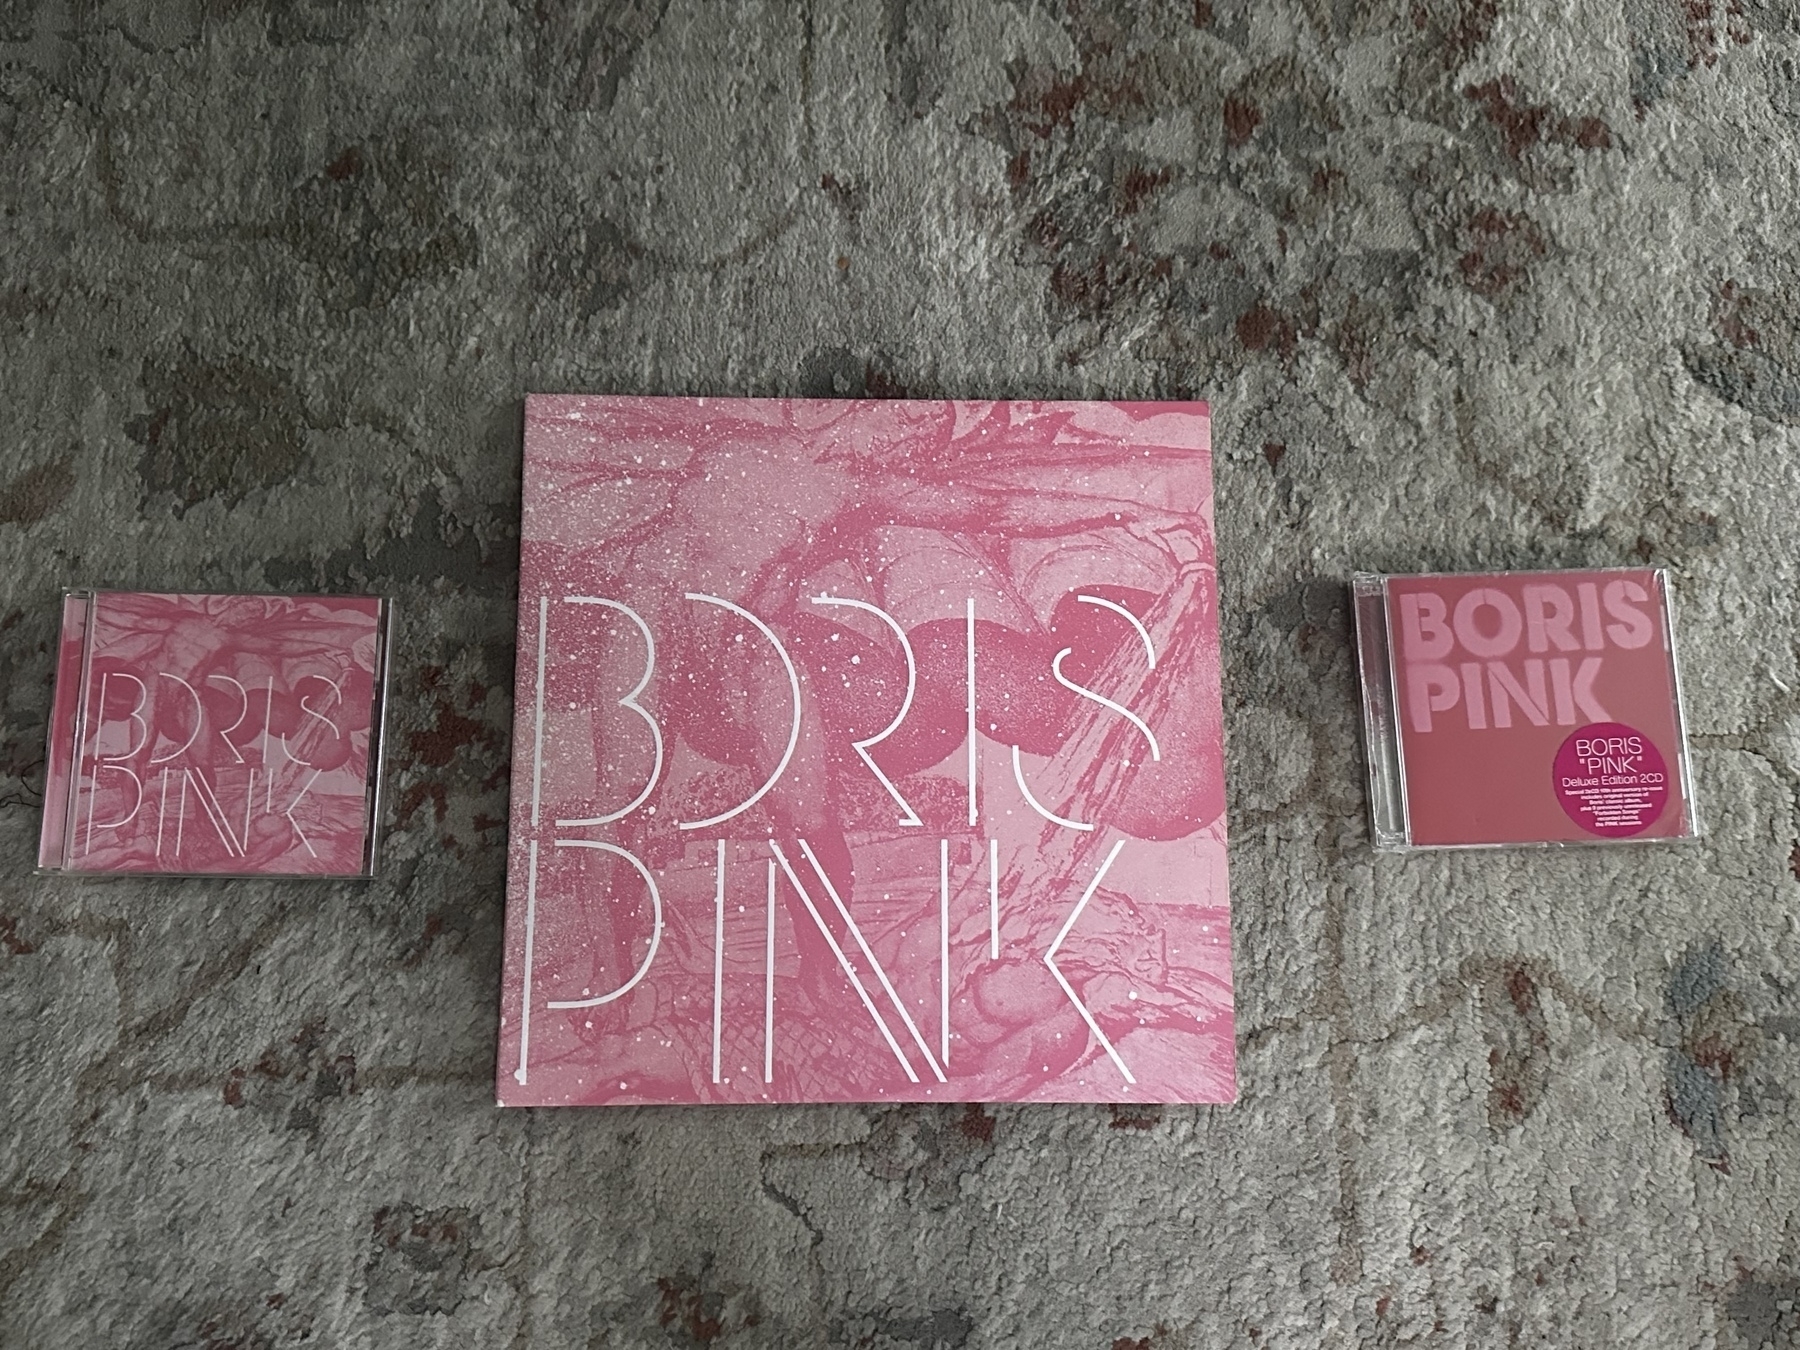 Pink album by Boris in theee different versions—CD, LP, and deluxe CD